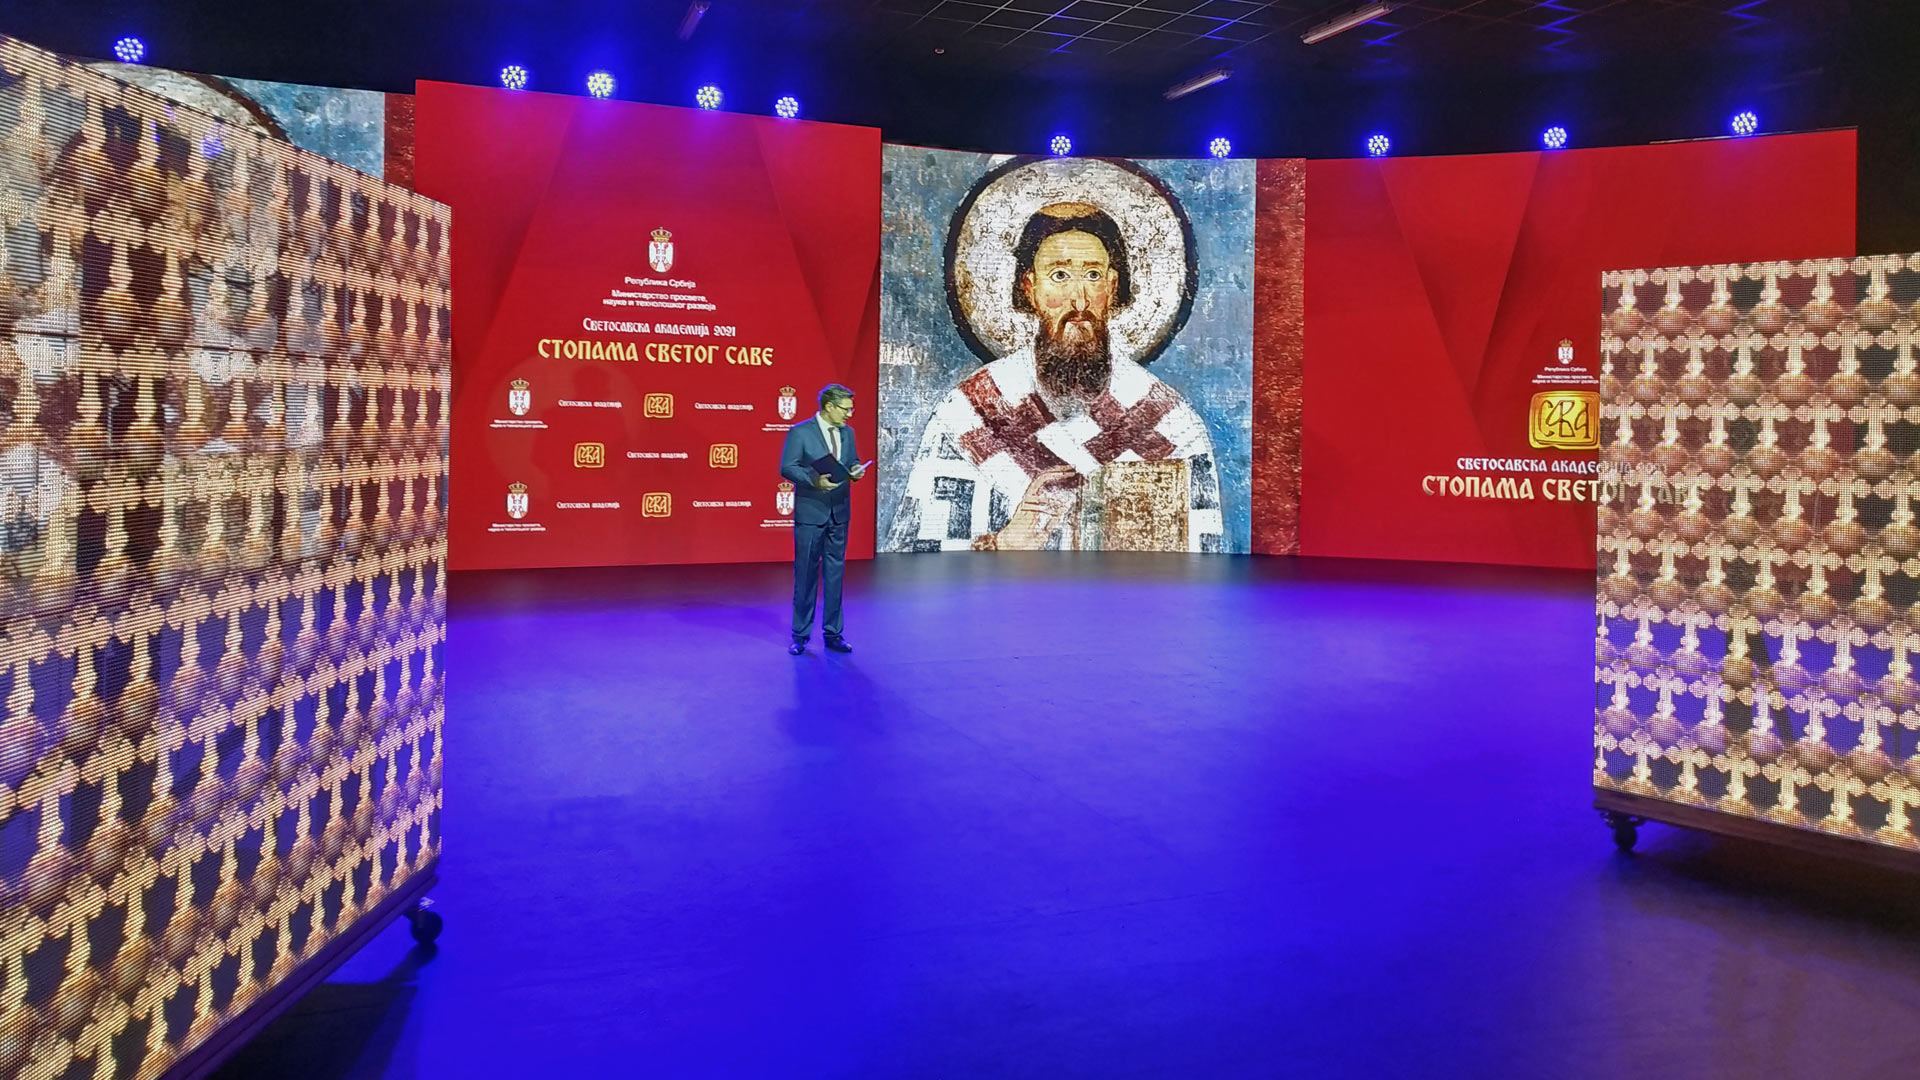 The show "Following the footsteps of St. Sava"